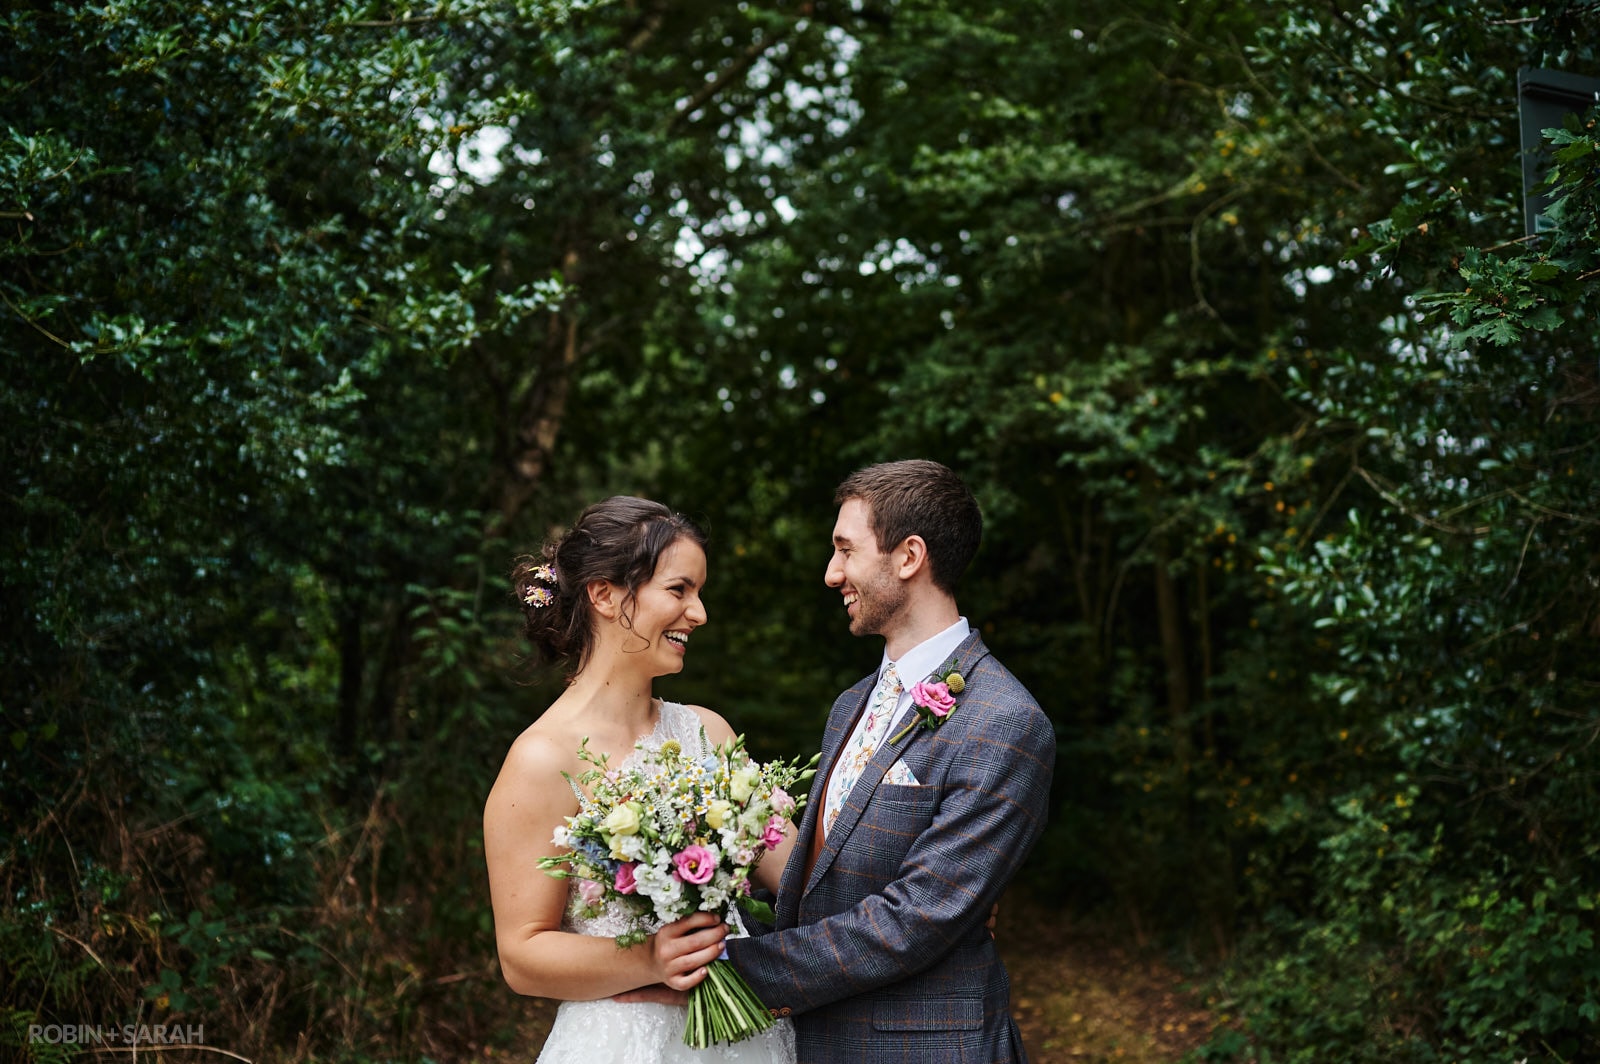 Bride and groom enjoy time together in beautiful woodland park